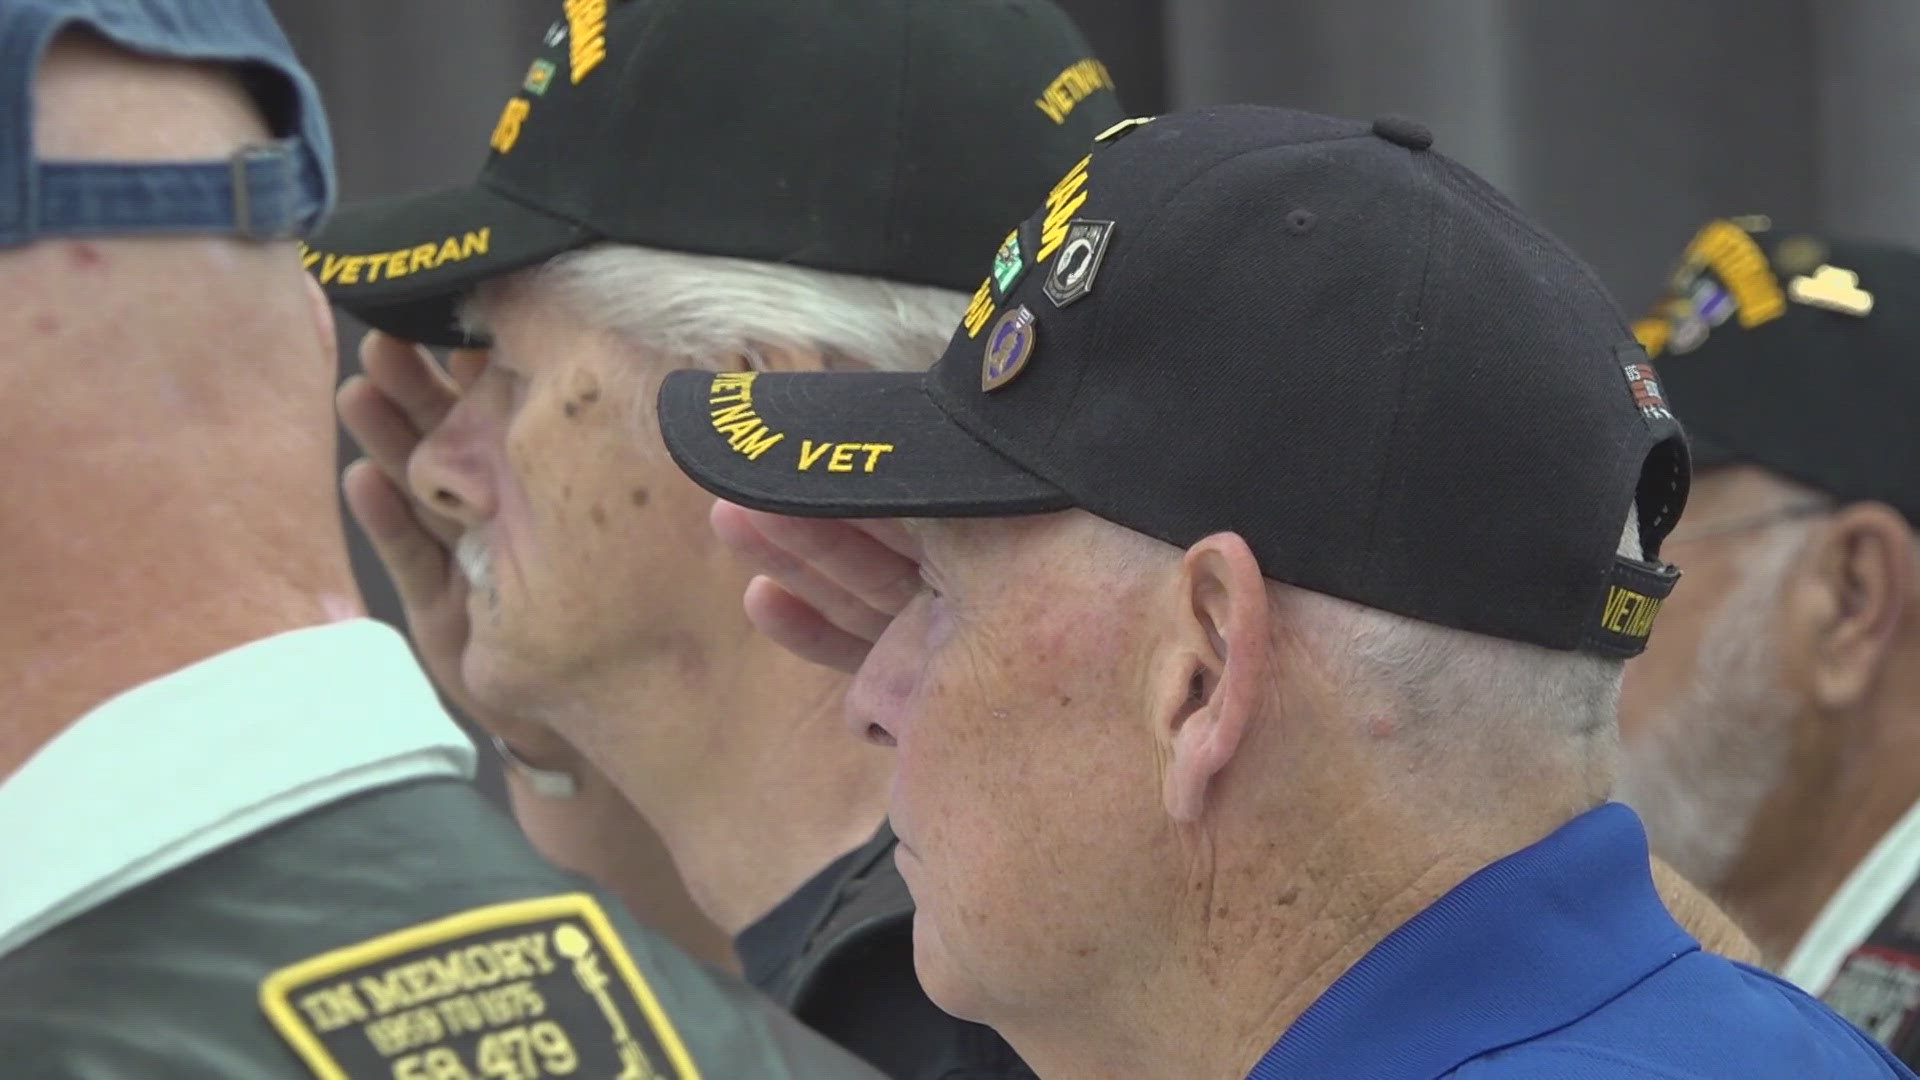 Students at Orange Park High School in Clay County got the chance to meet some of their local Vietnam veterans.